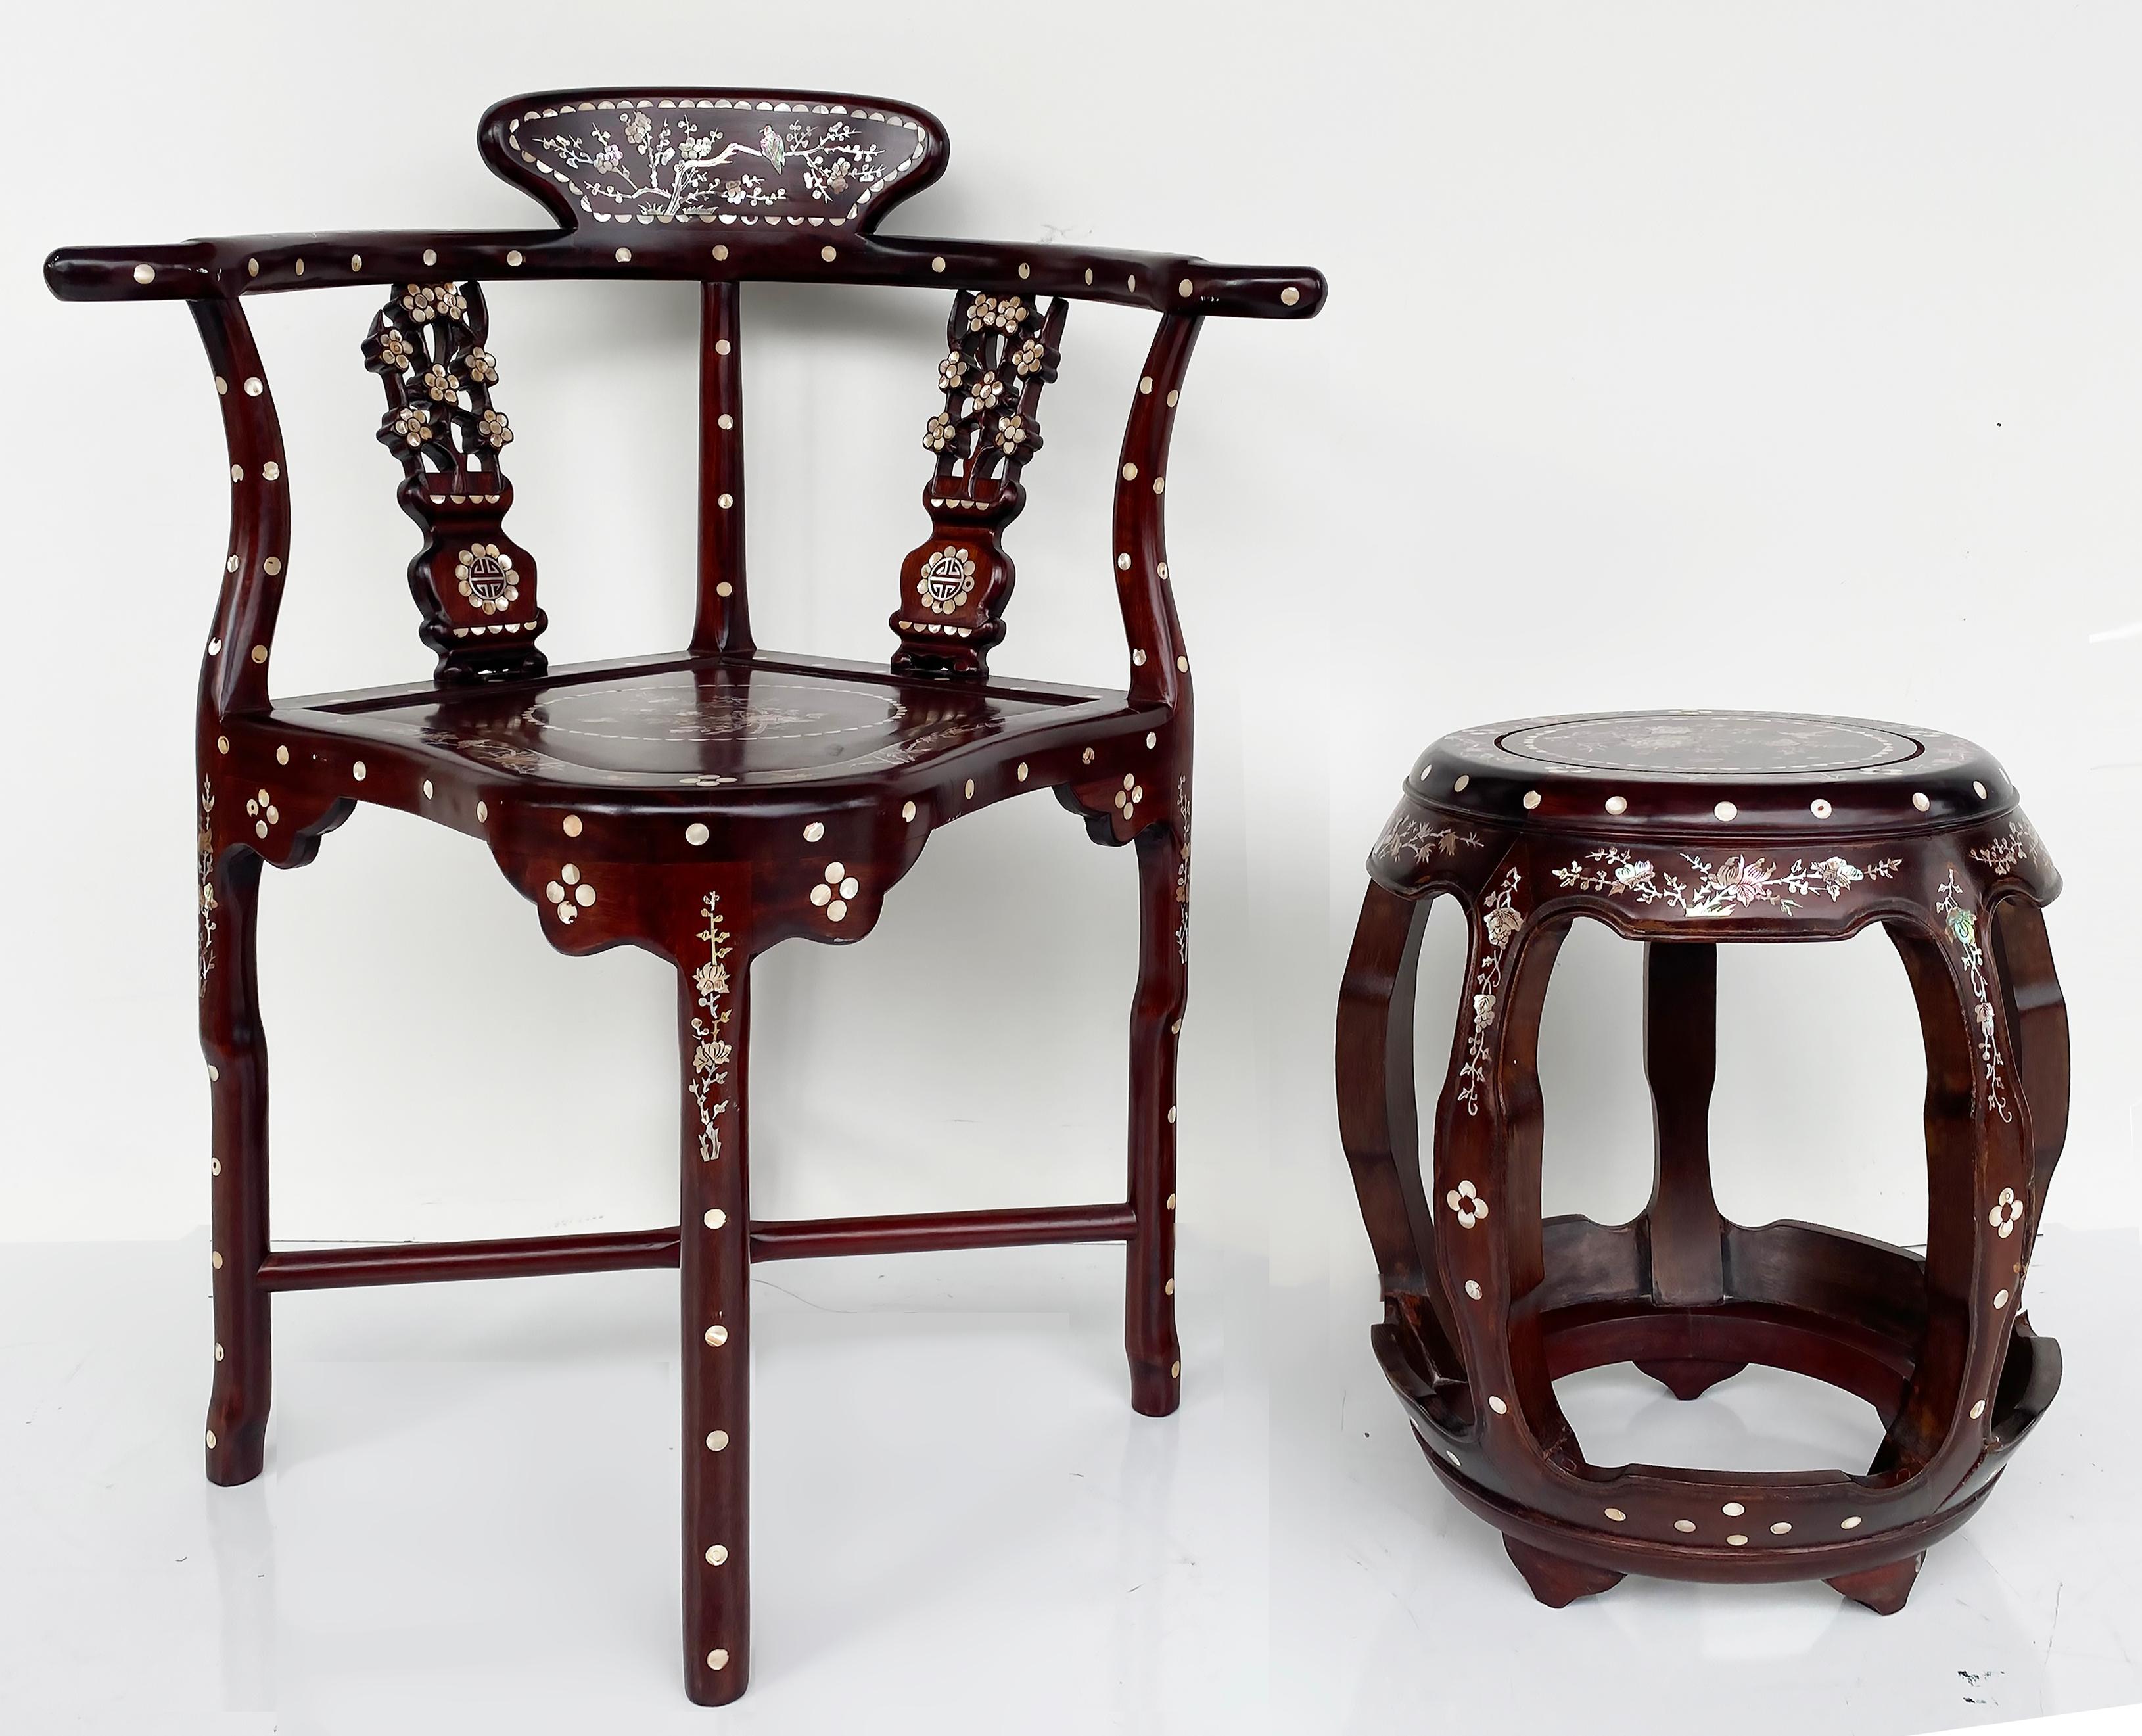 Chinese Mother of Pearl Fine Intricately Inlaid Corner Chair 

Offered for sale is a lovely Chinese mother-of-pearl inlaid padouk wood corner chair with sturdy cross stretchers supporting the base.  The matching side table that is pictured in the